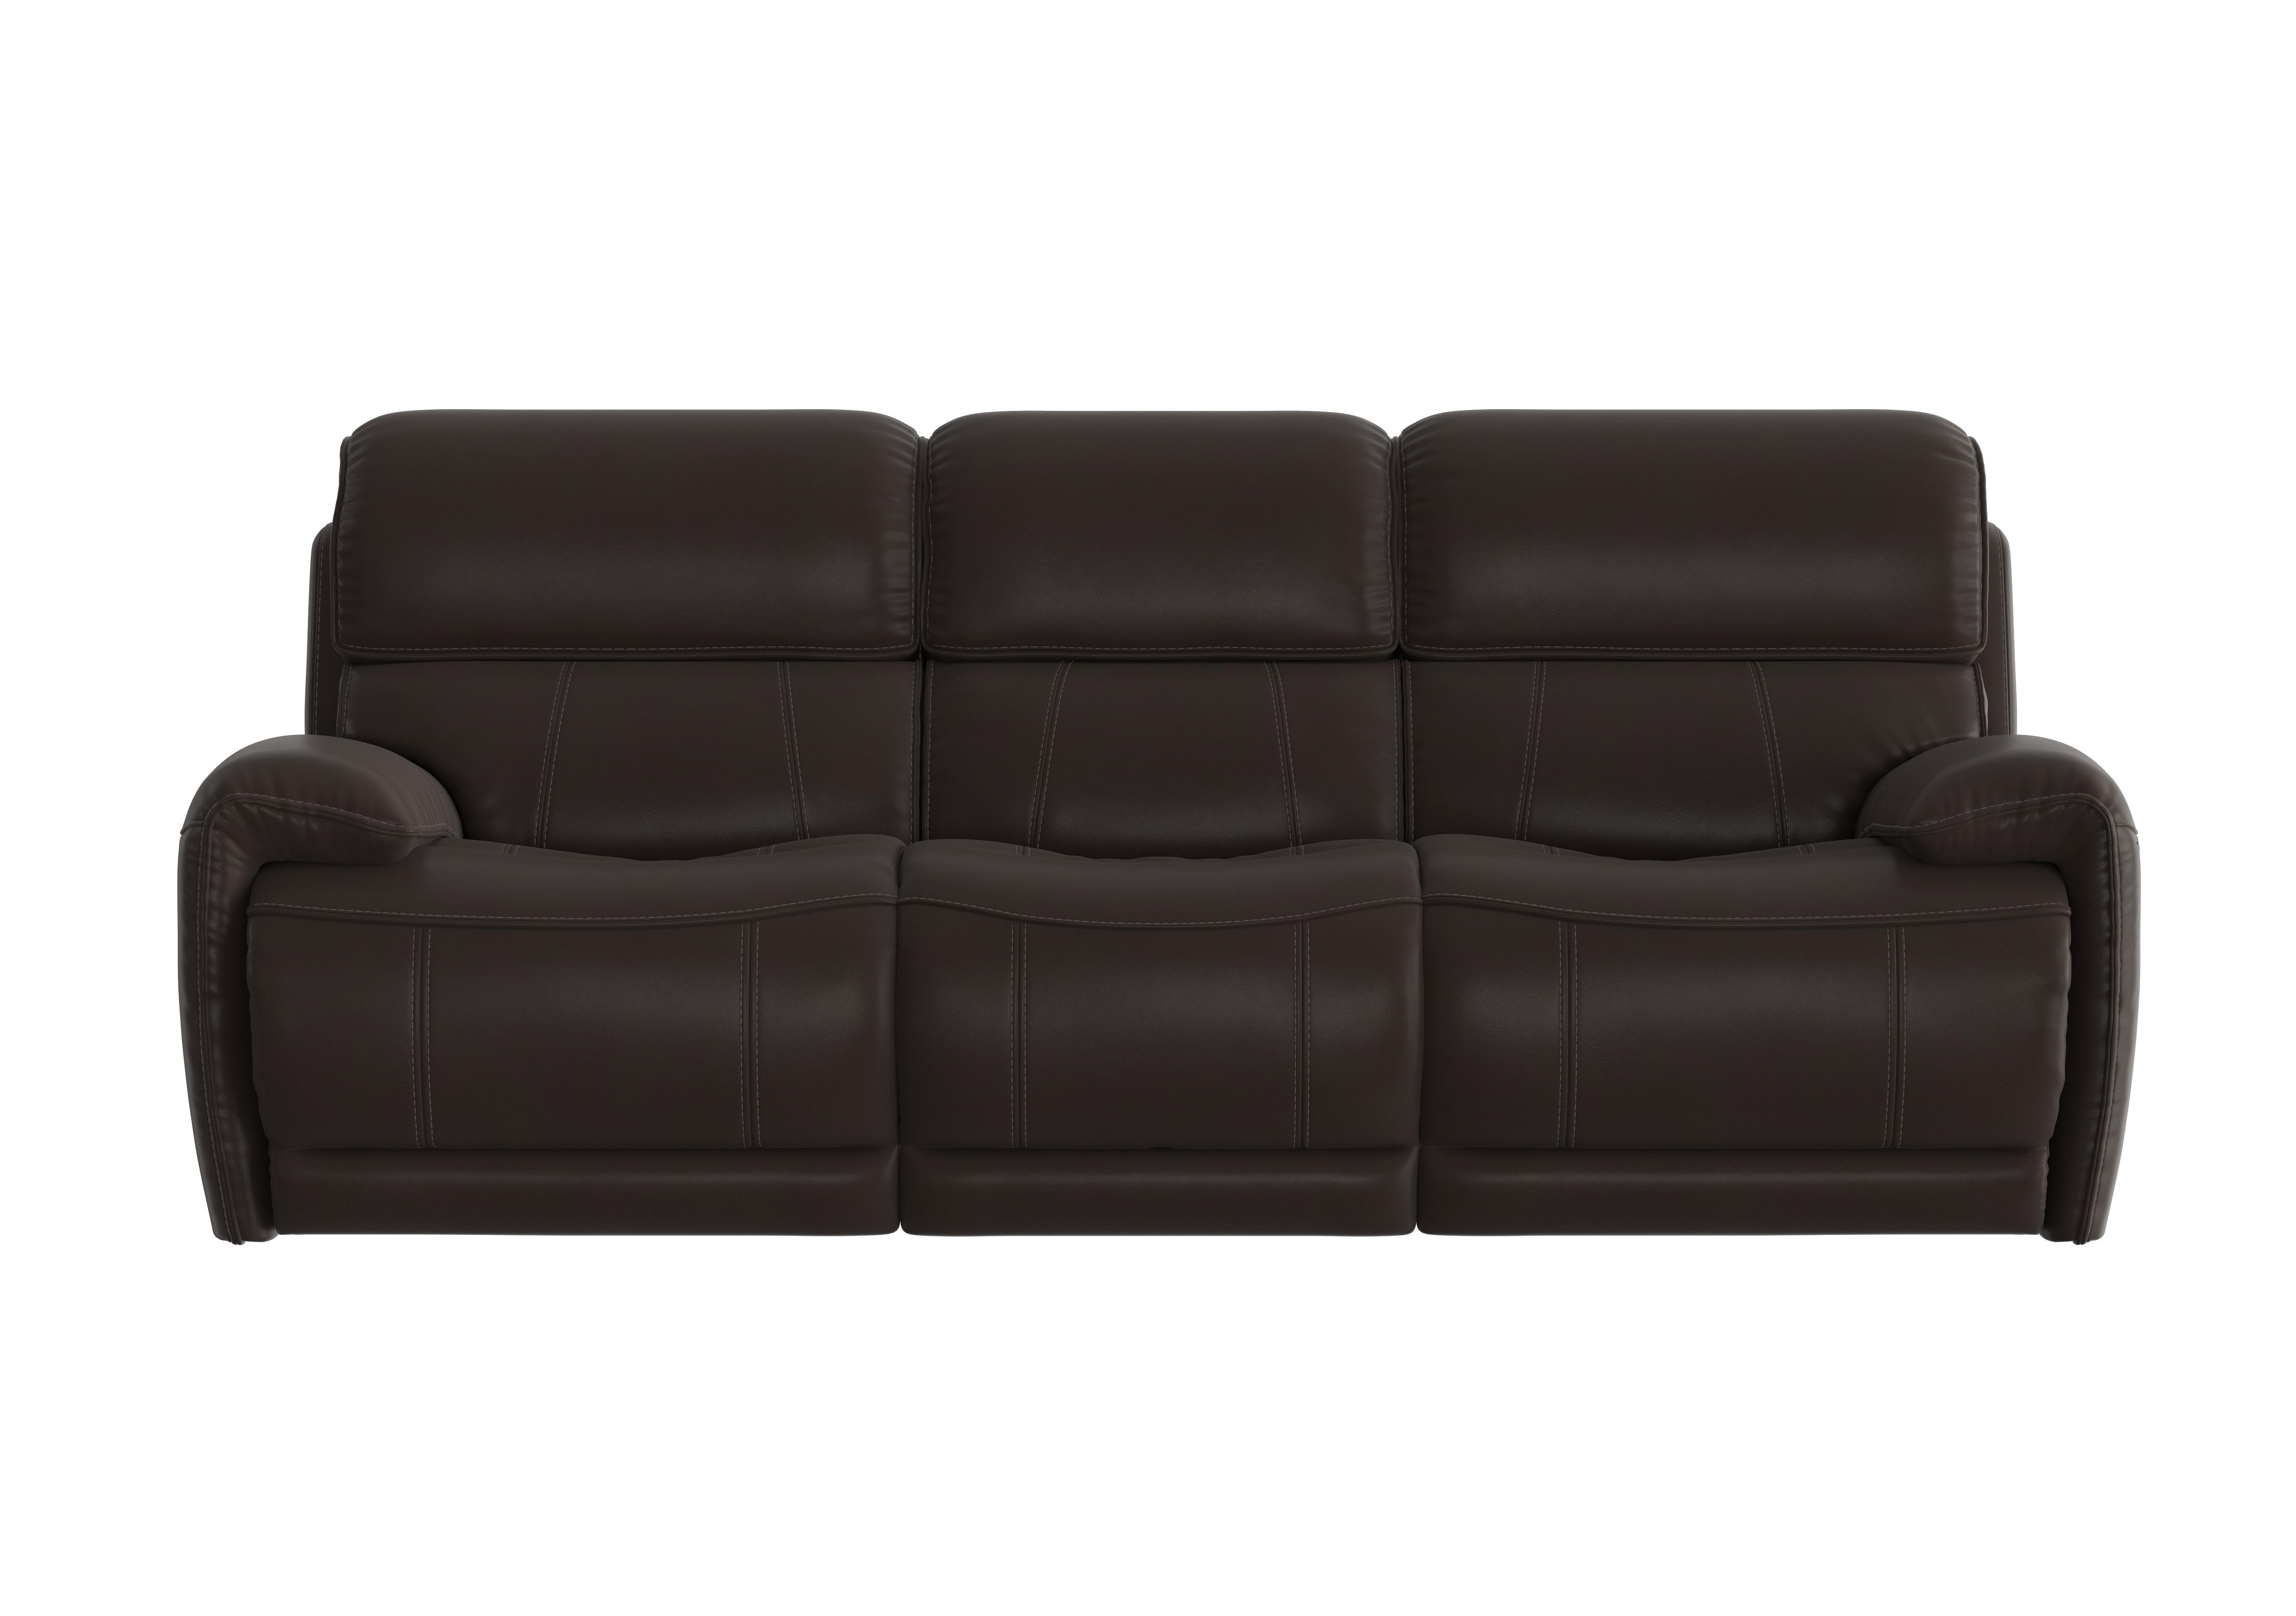 Link 3 Seater Leather Power Recliner Sofa with Power Headrests in Bv-1748 Dark Chocolate on Furniture Village